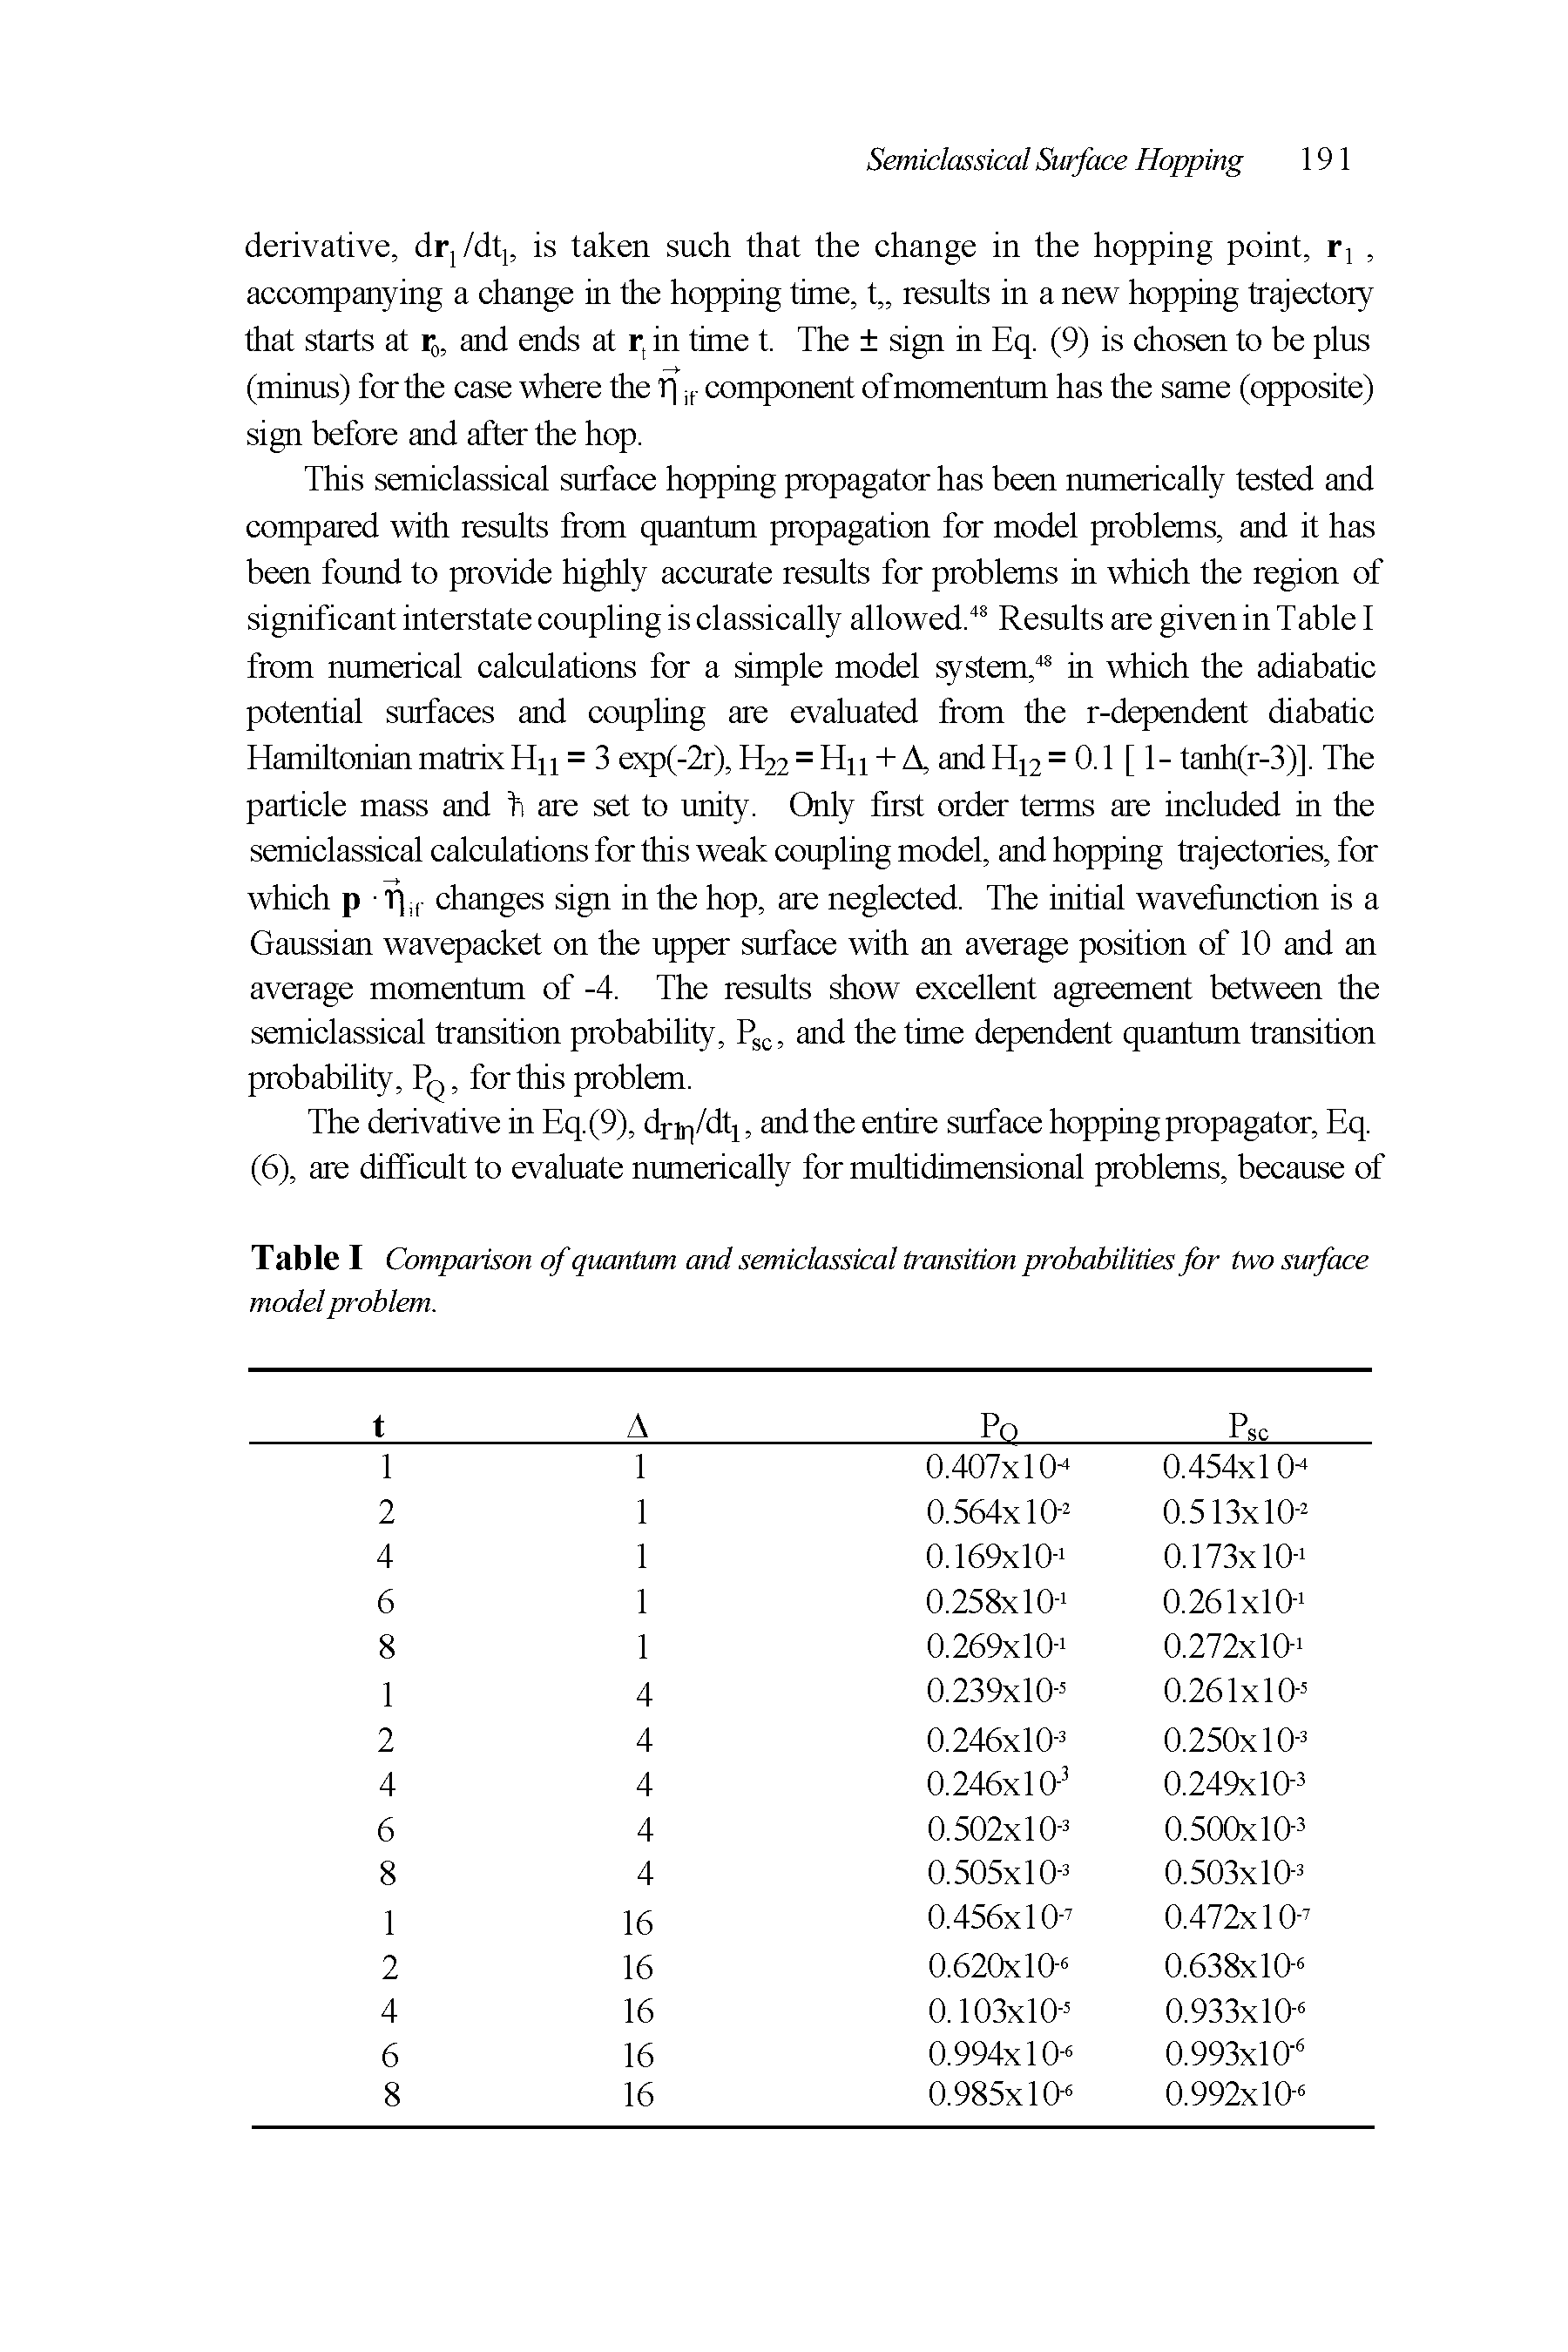 Table I Comparison of quantum and semiclassical transition probabilities for two surface model problem.